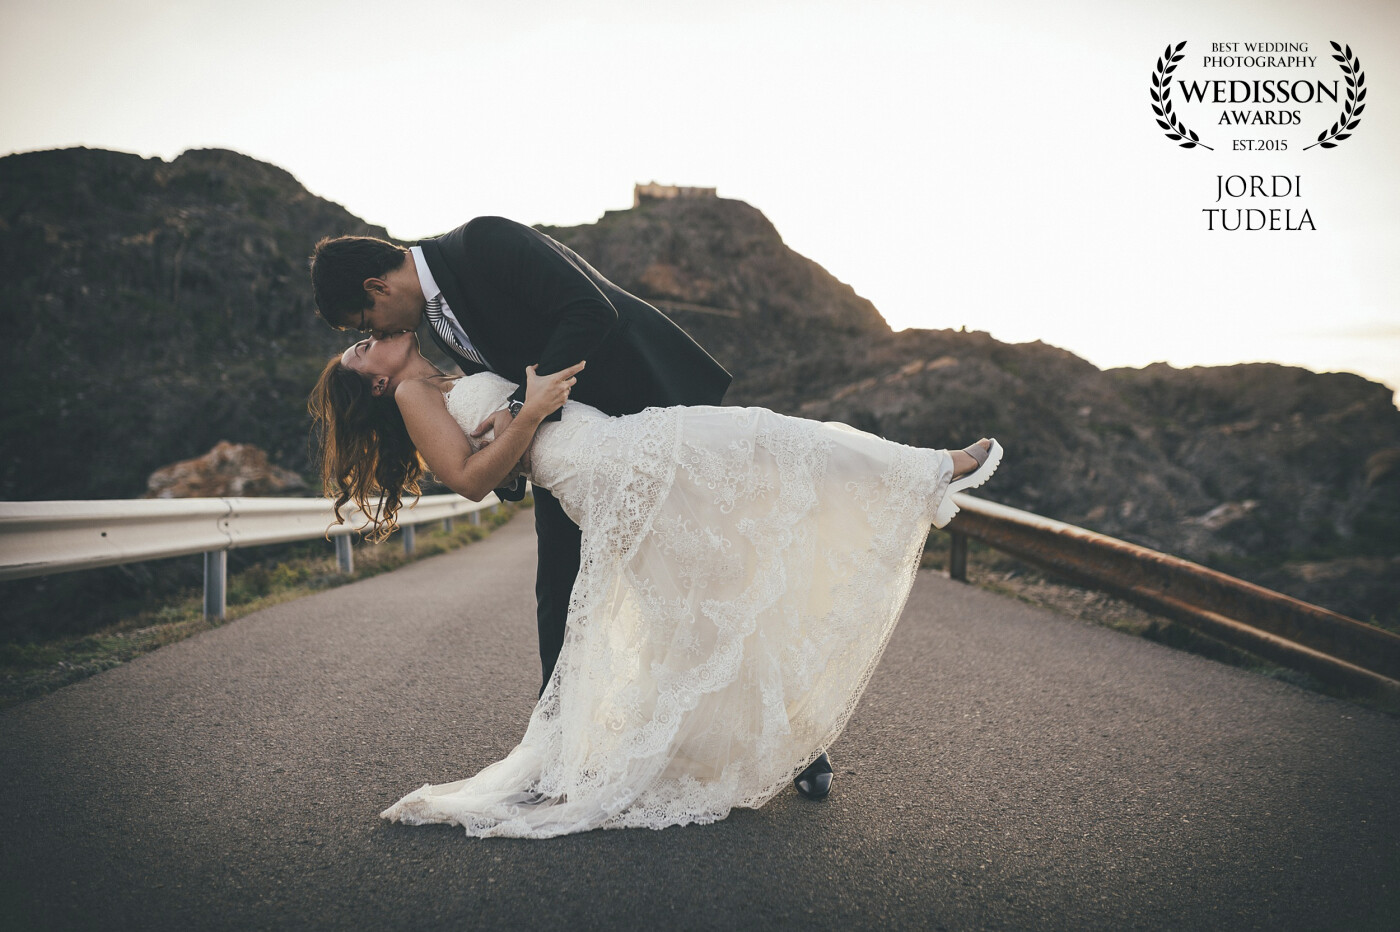 postwedding in cadaqués, catalonia, spain. <br />
After a great wedding, they decided to do a post-wedding with touches of sea, in cap de creus and cadaqués. coastal town of the Mediterranean